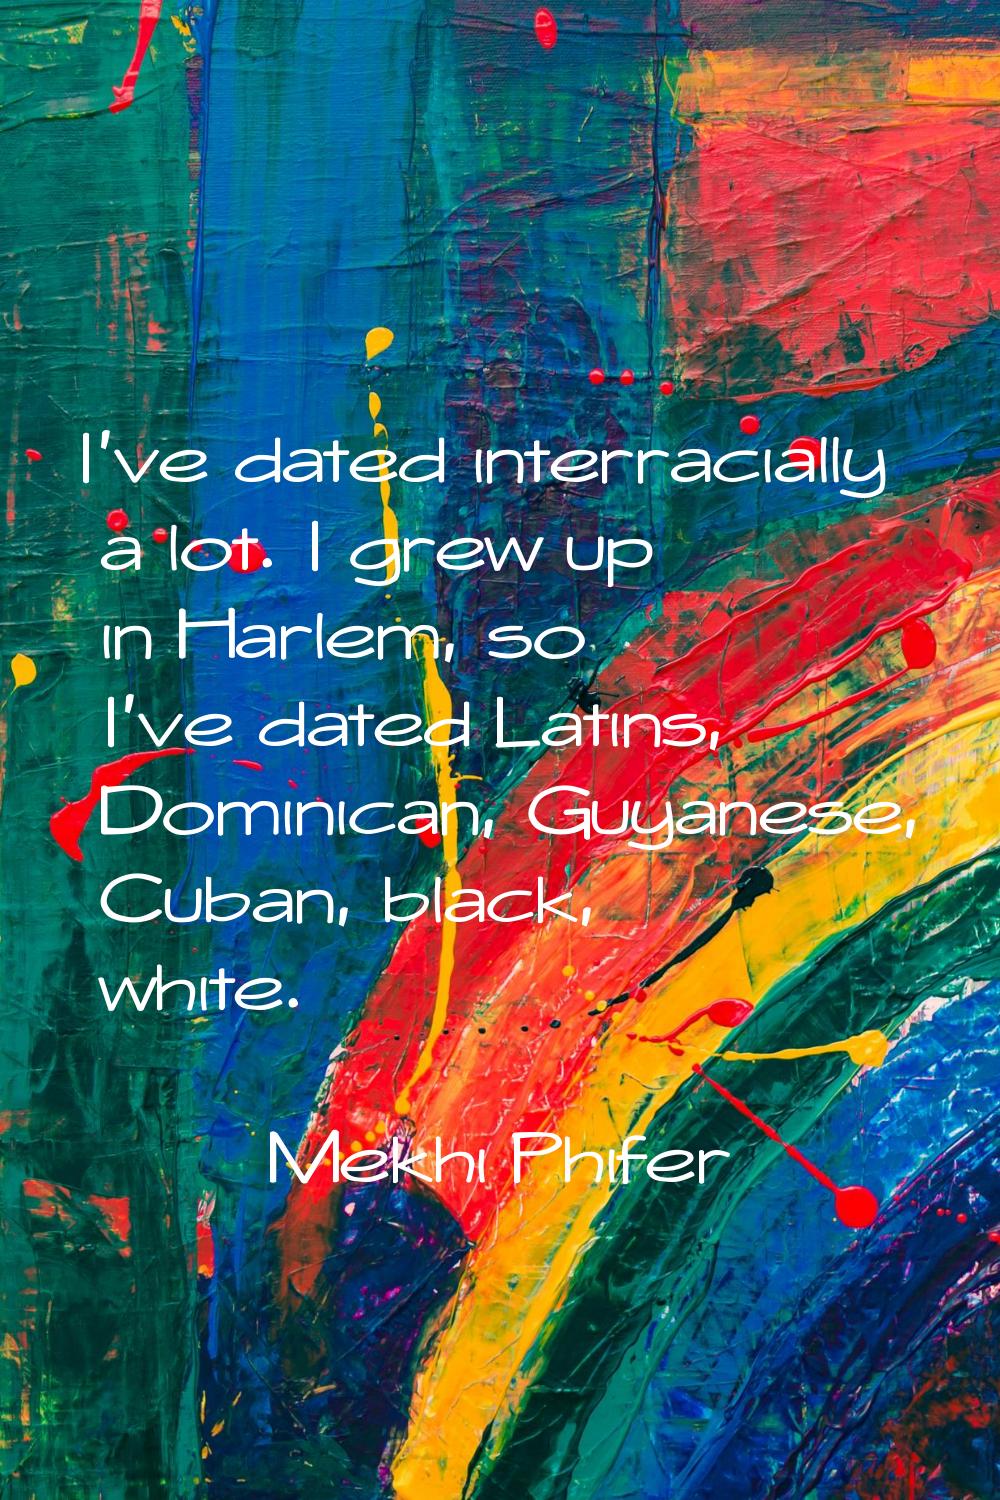 I've dated interracially a lot. I grew up in Harlem, so I've dated Latins, Dominican, Guyanese, Cub